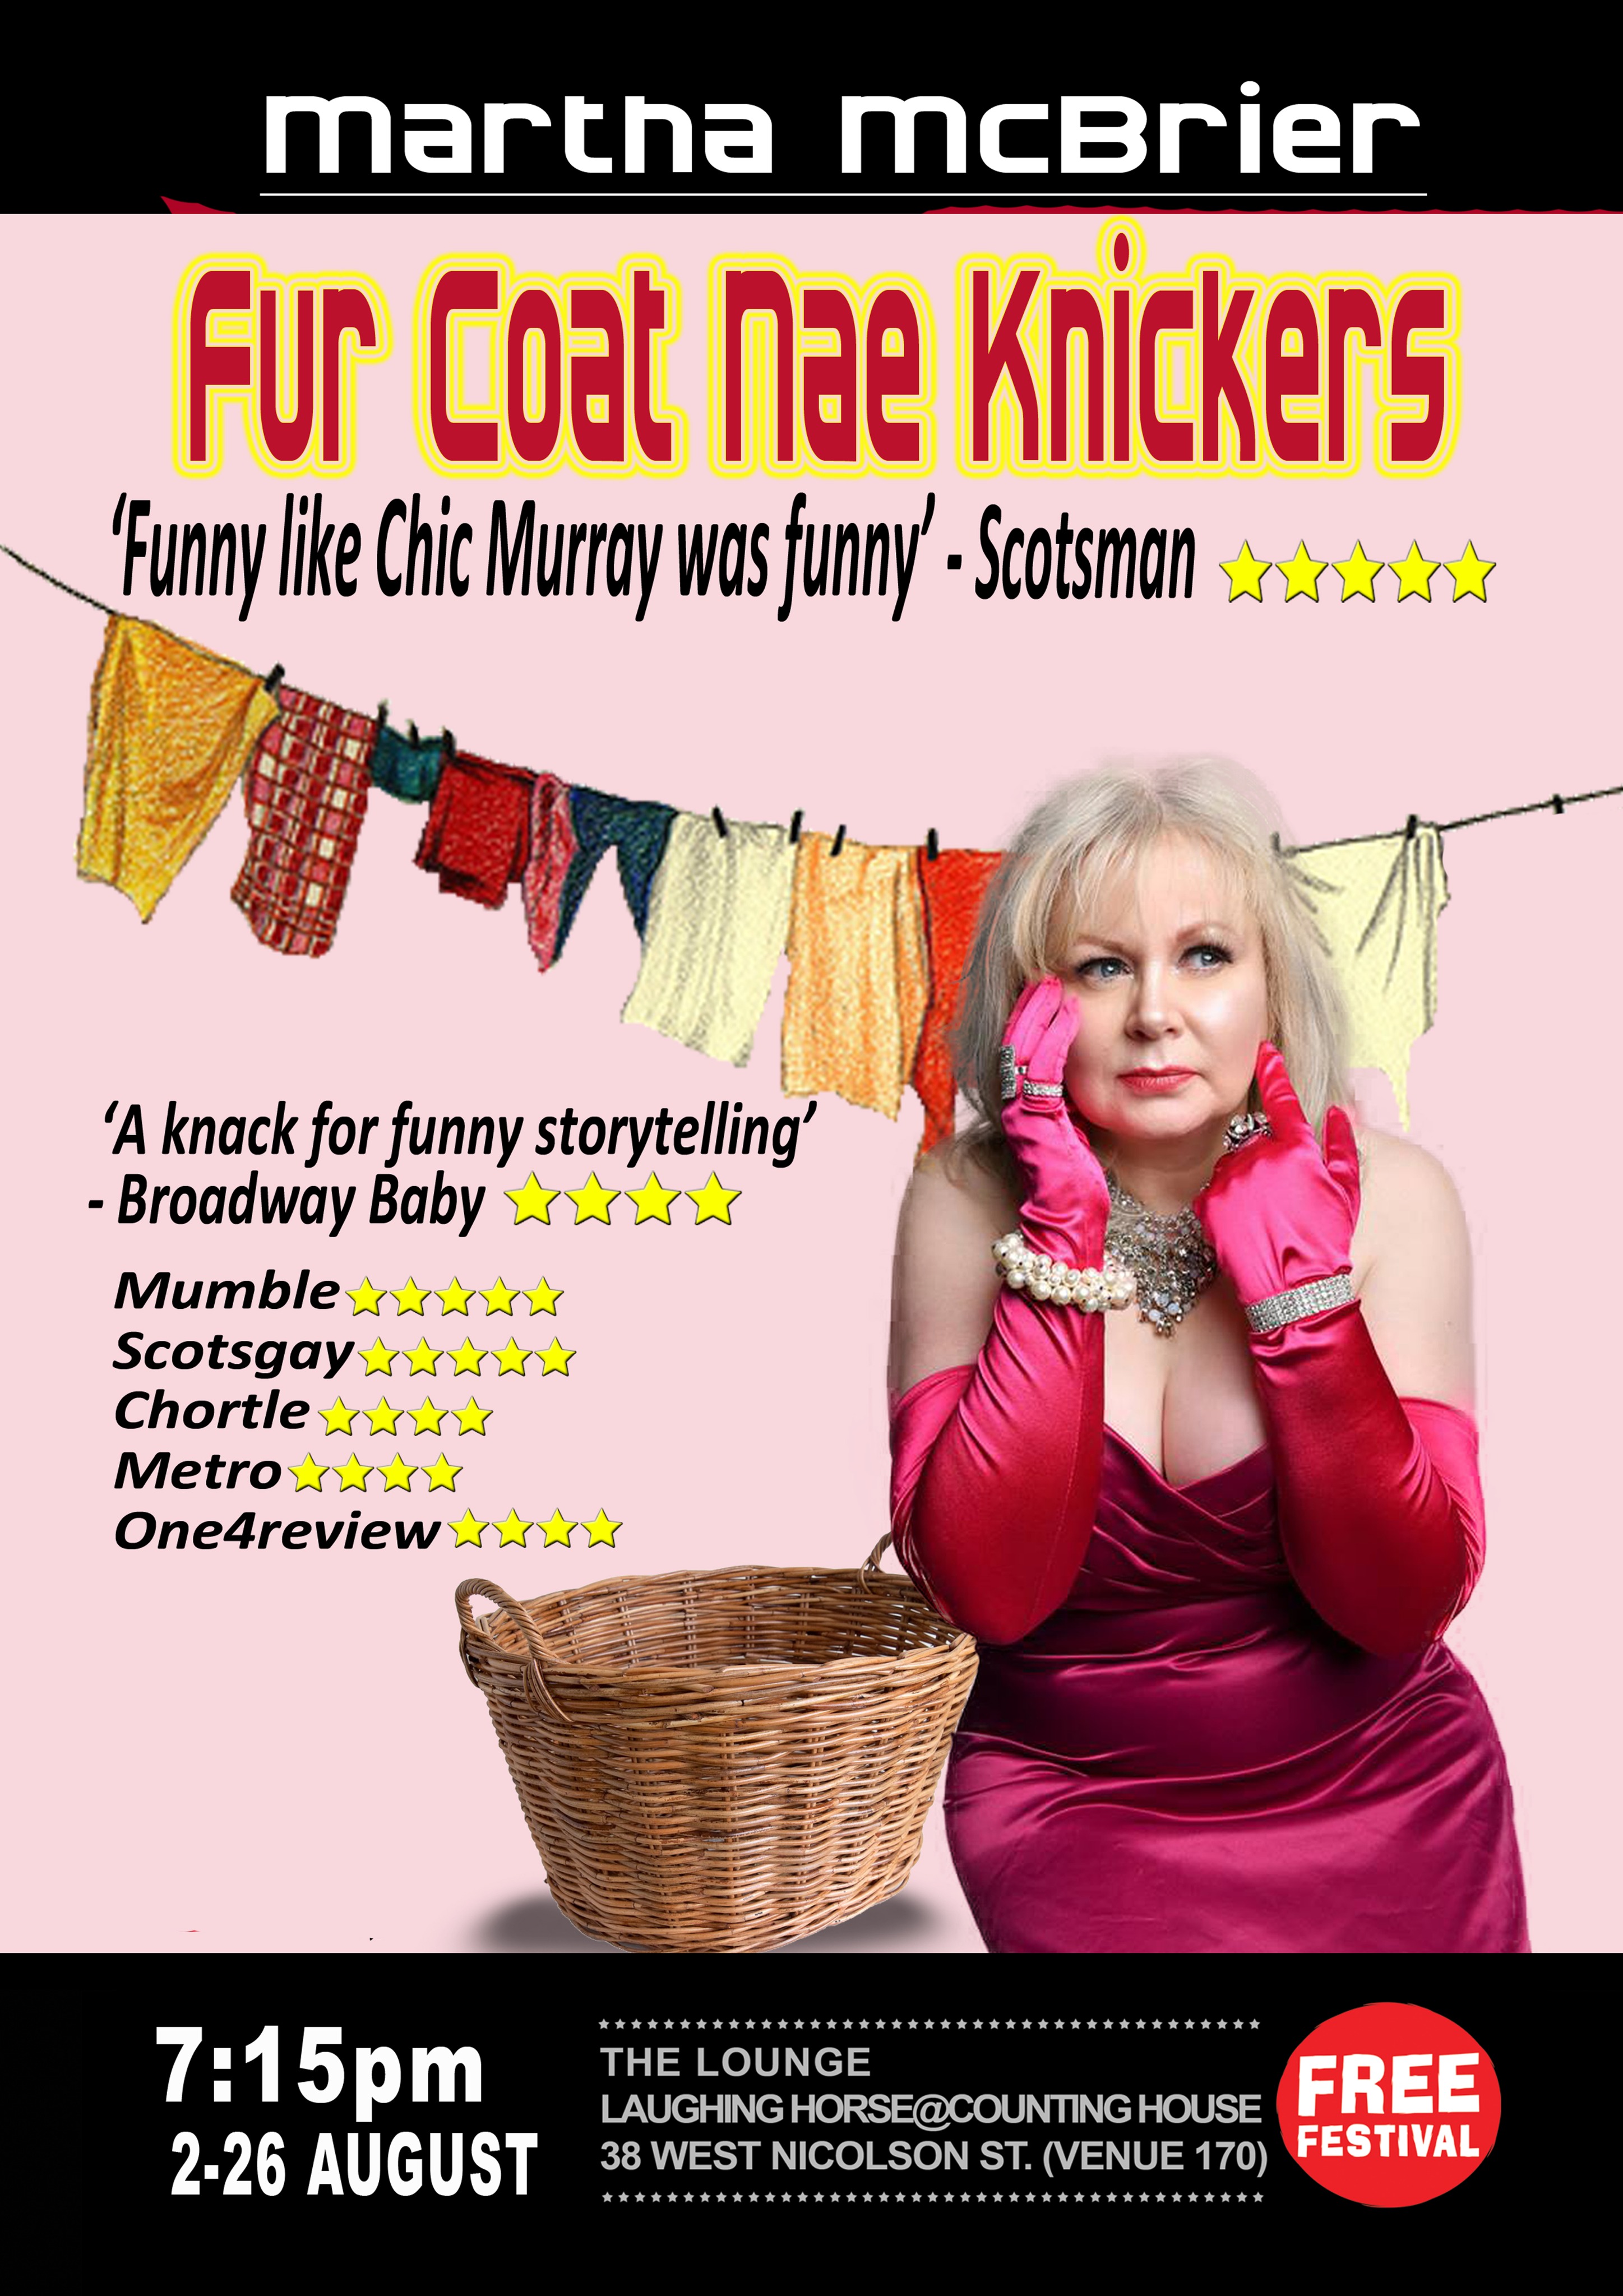 The poster for Martha McBrier - Fur Coat Nae Knickers